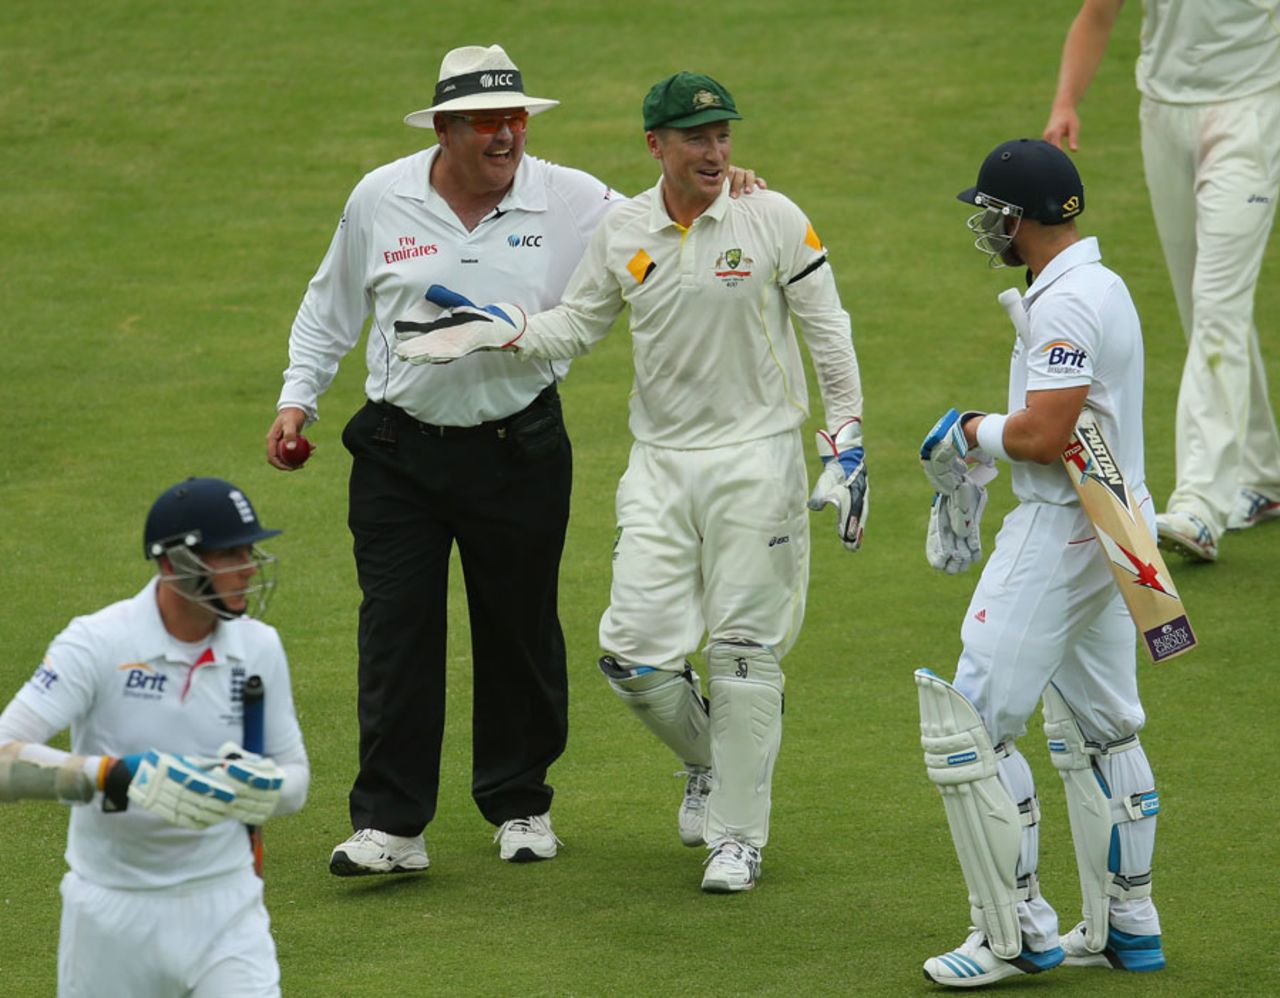 There was plenty of chat from both sets of players, Australia v England, 2nd Test, Adelaide, 4th day, December 8, 2013